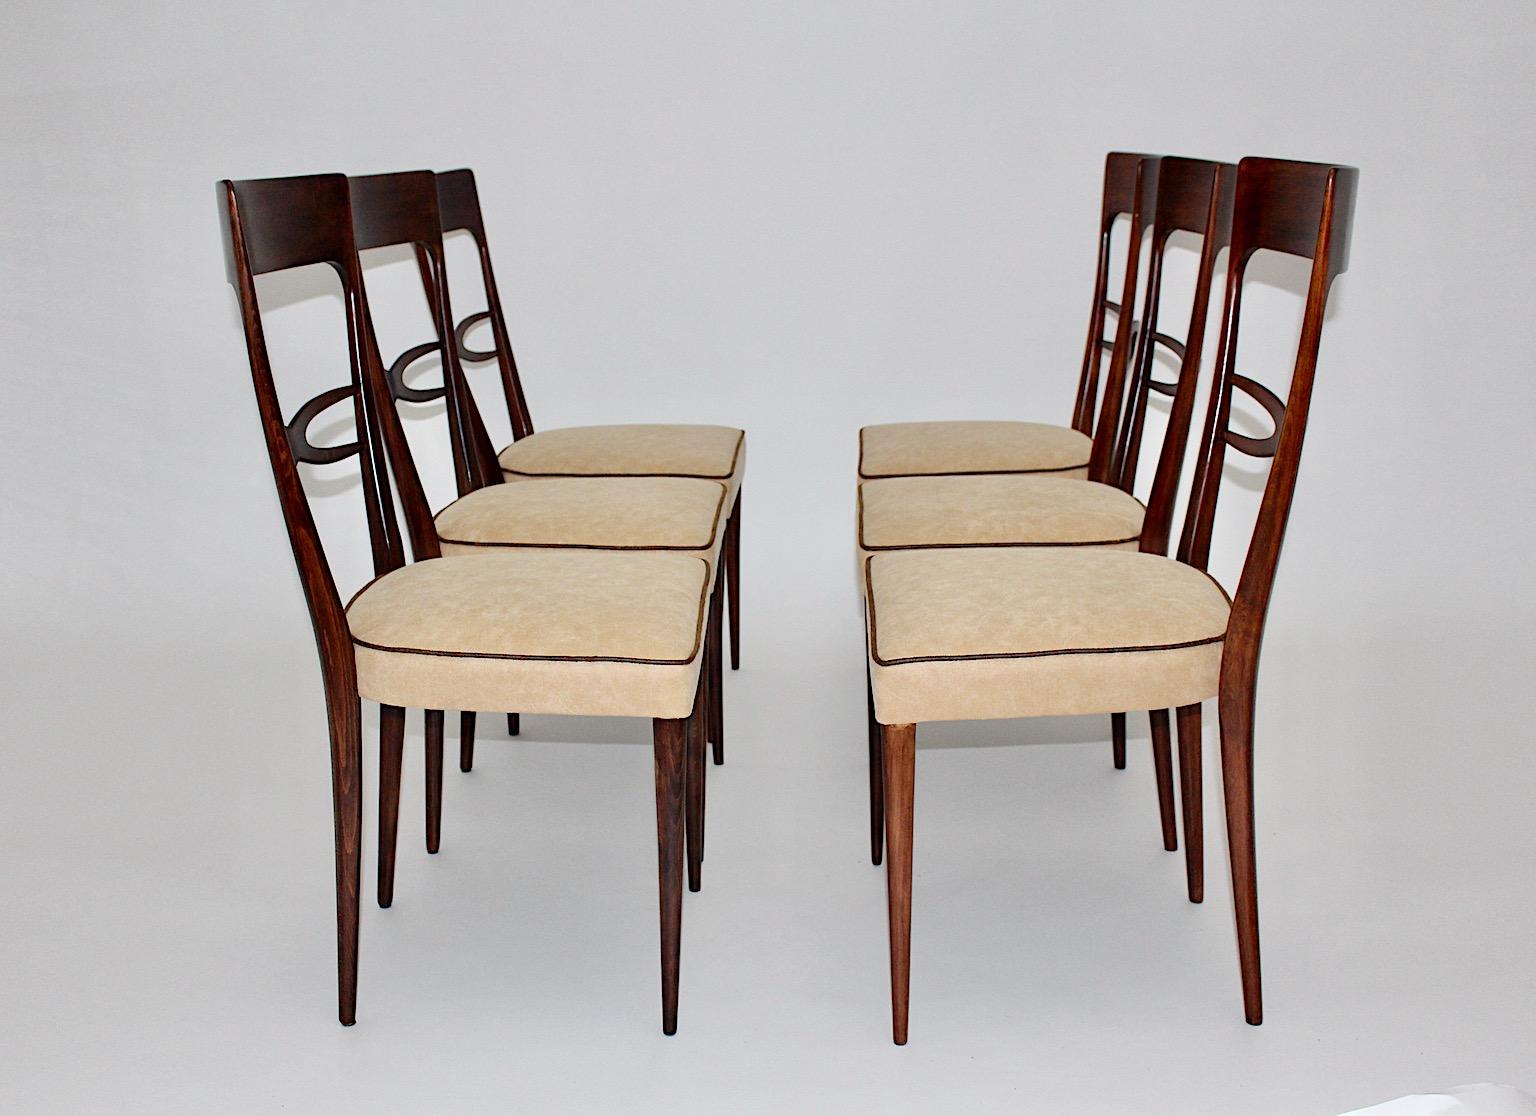 Upholstery Mid-Century Modern Six Dining Chairs Brown Beech Melchiorre Bega, 1950, Italy